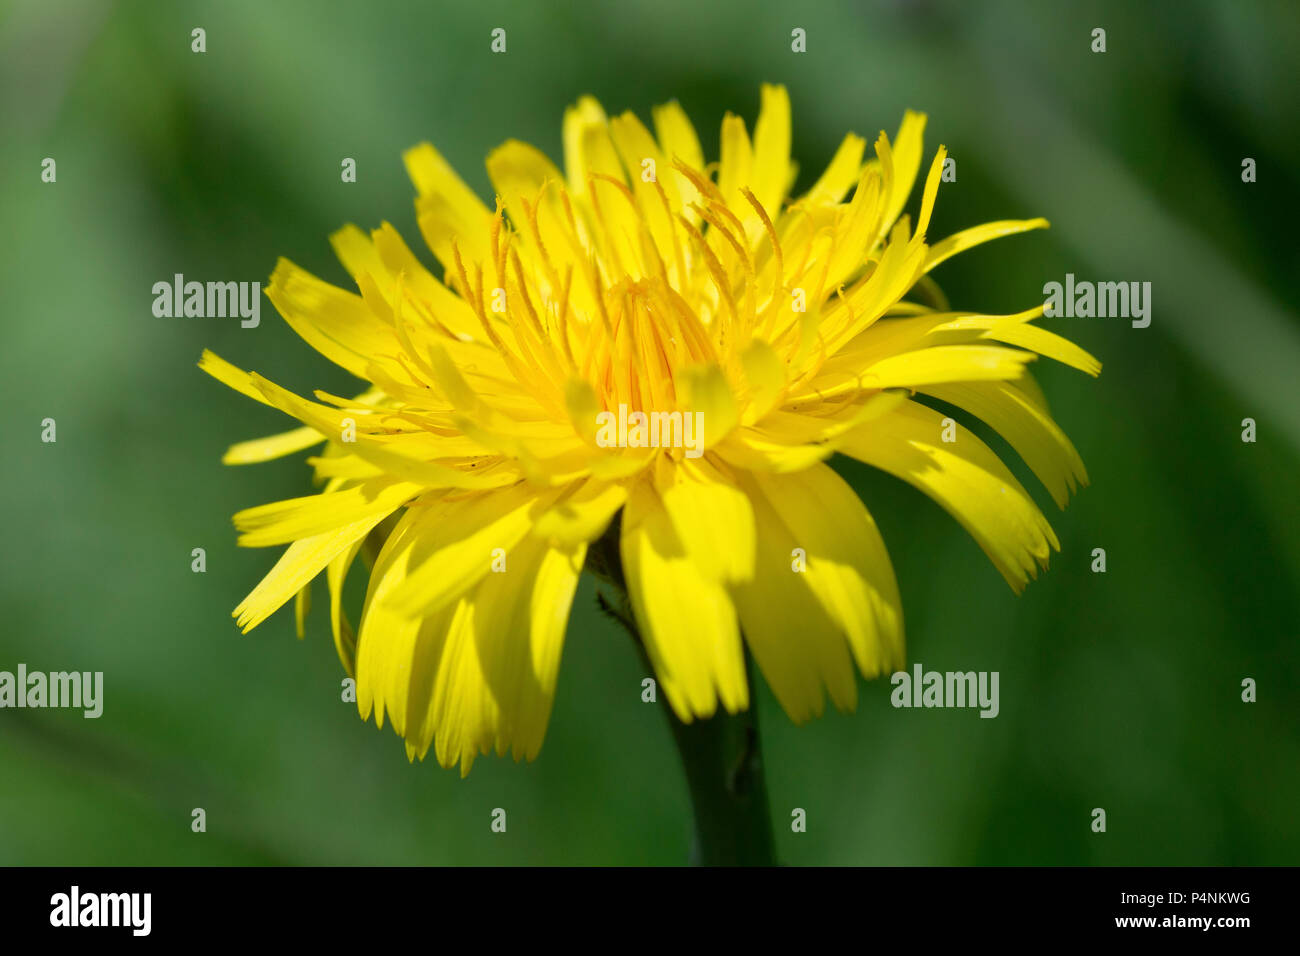 Common Hawkweed (hieracium vulgatum or hieraceum vulgatum), close up of a single flower head showing detail and structure. Stock Photo